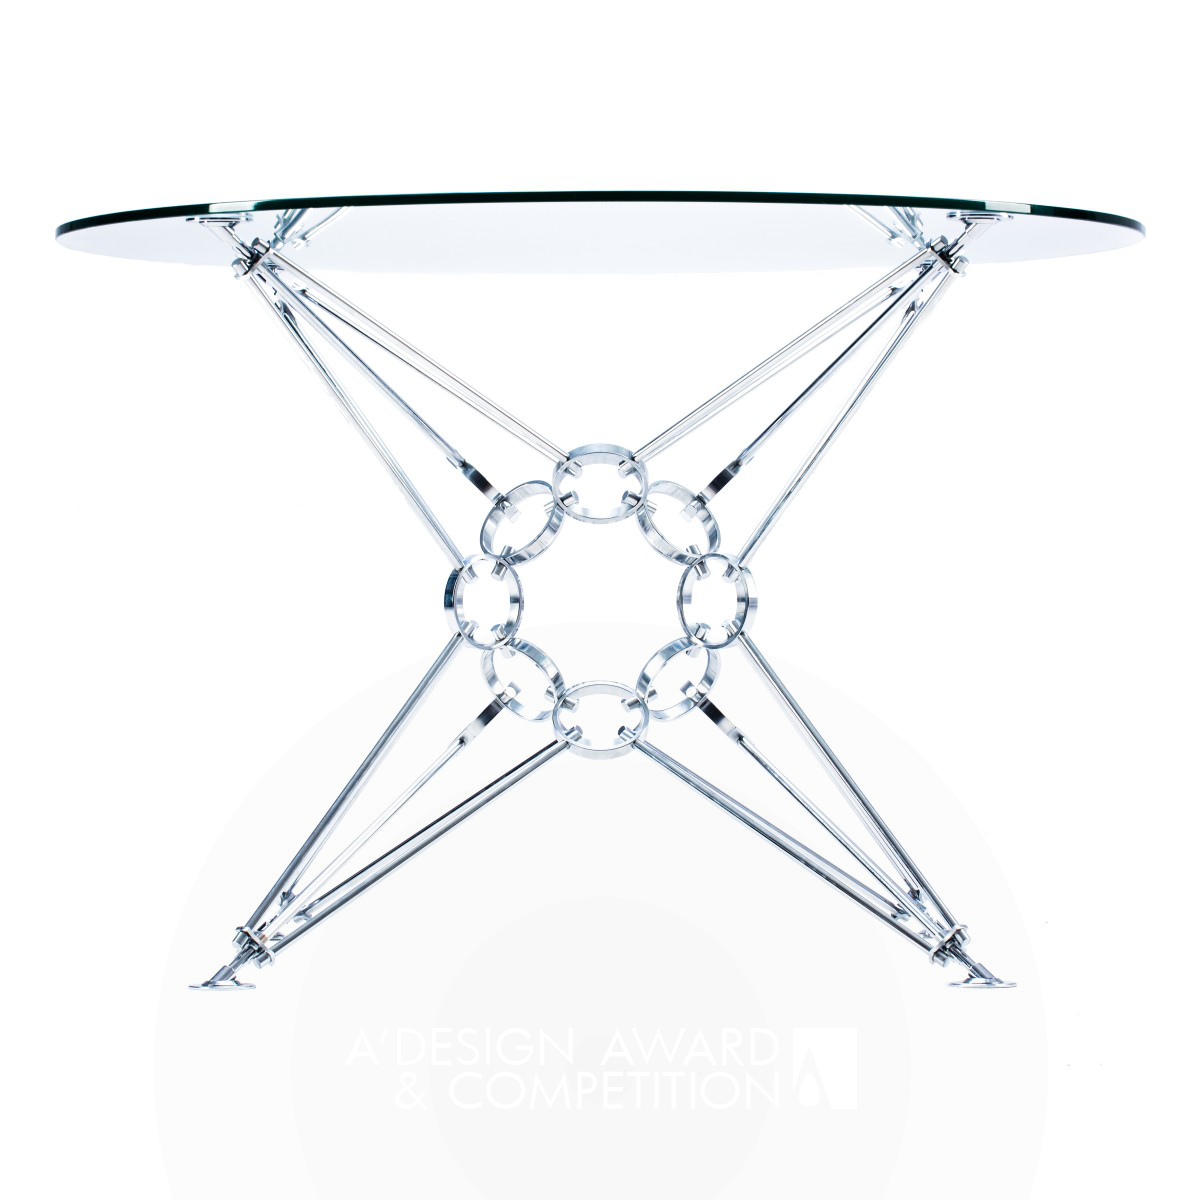 8 pyramids Table  by Irraciodesign Team